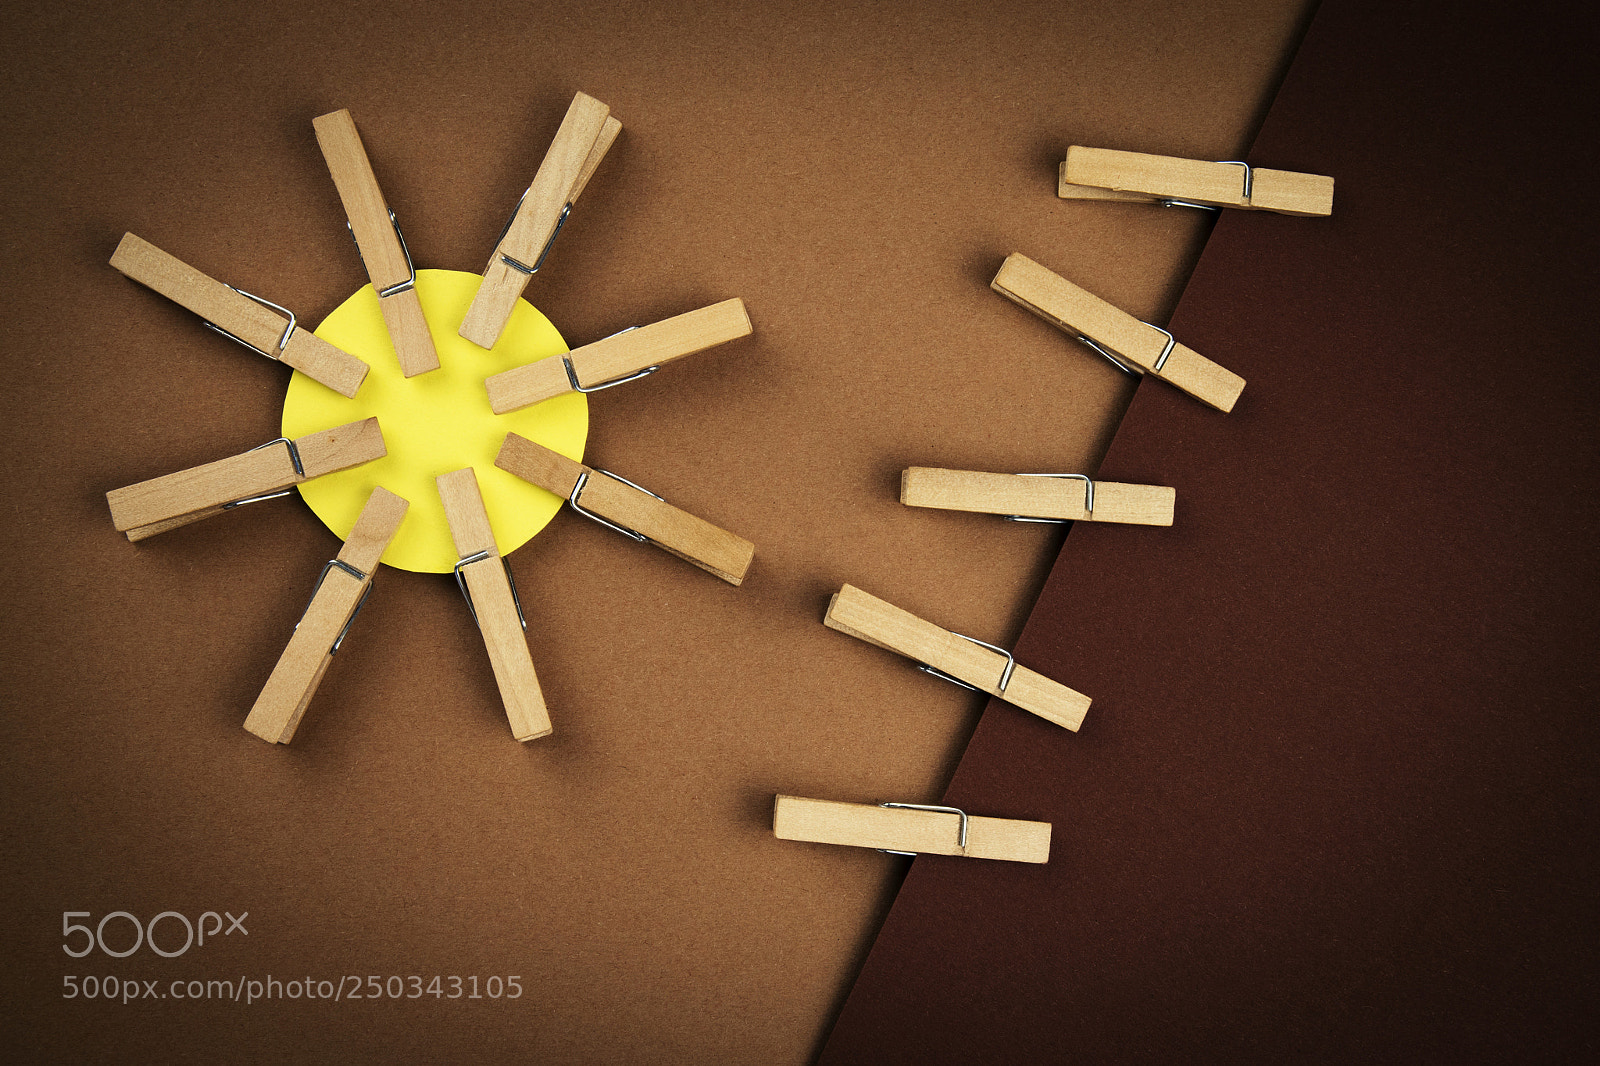 Nikon D5500 sample photo. Abstract sun with wooden photography